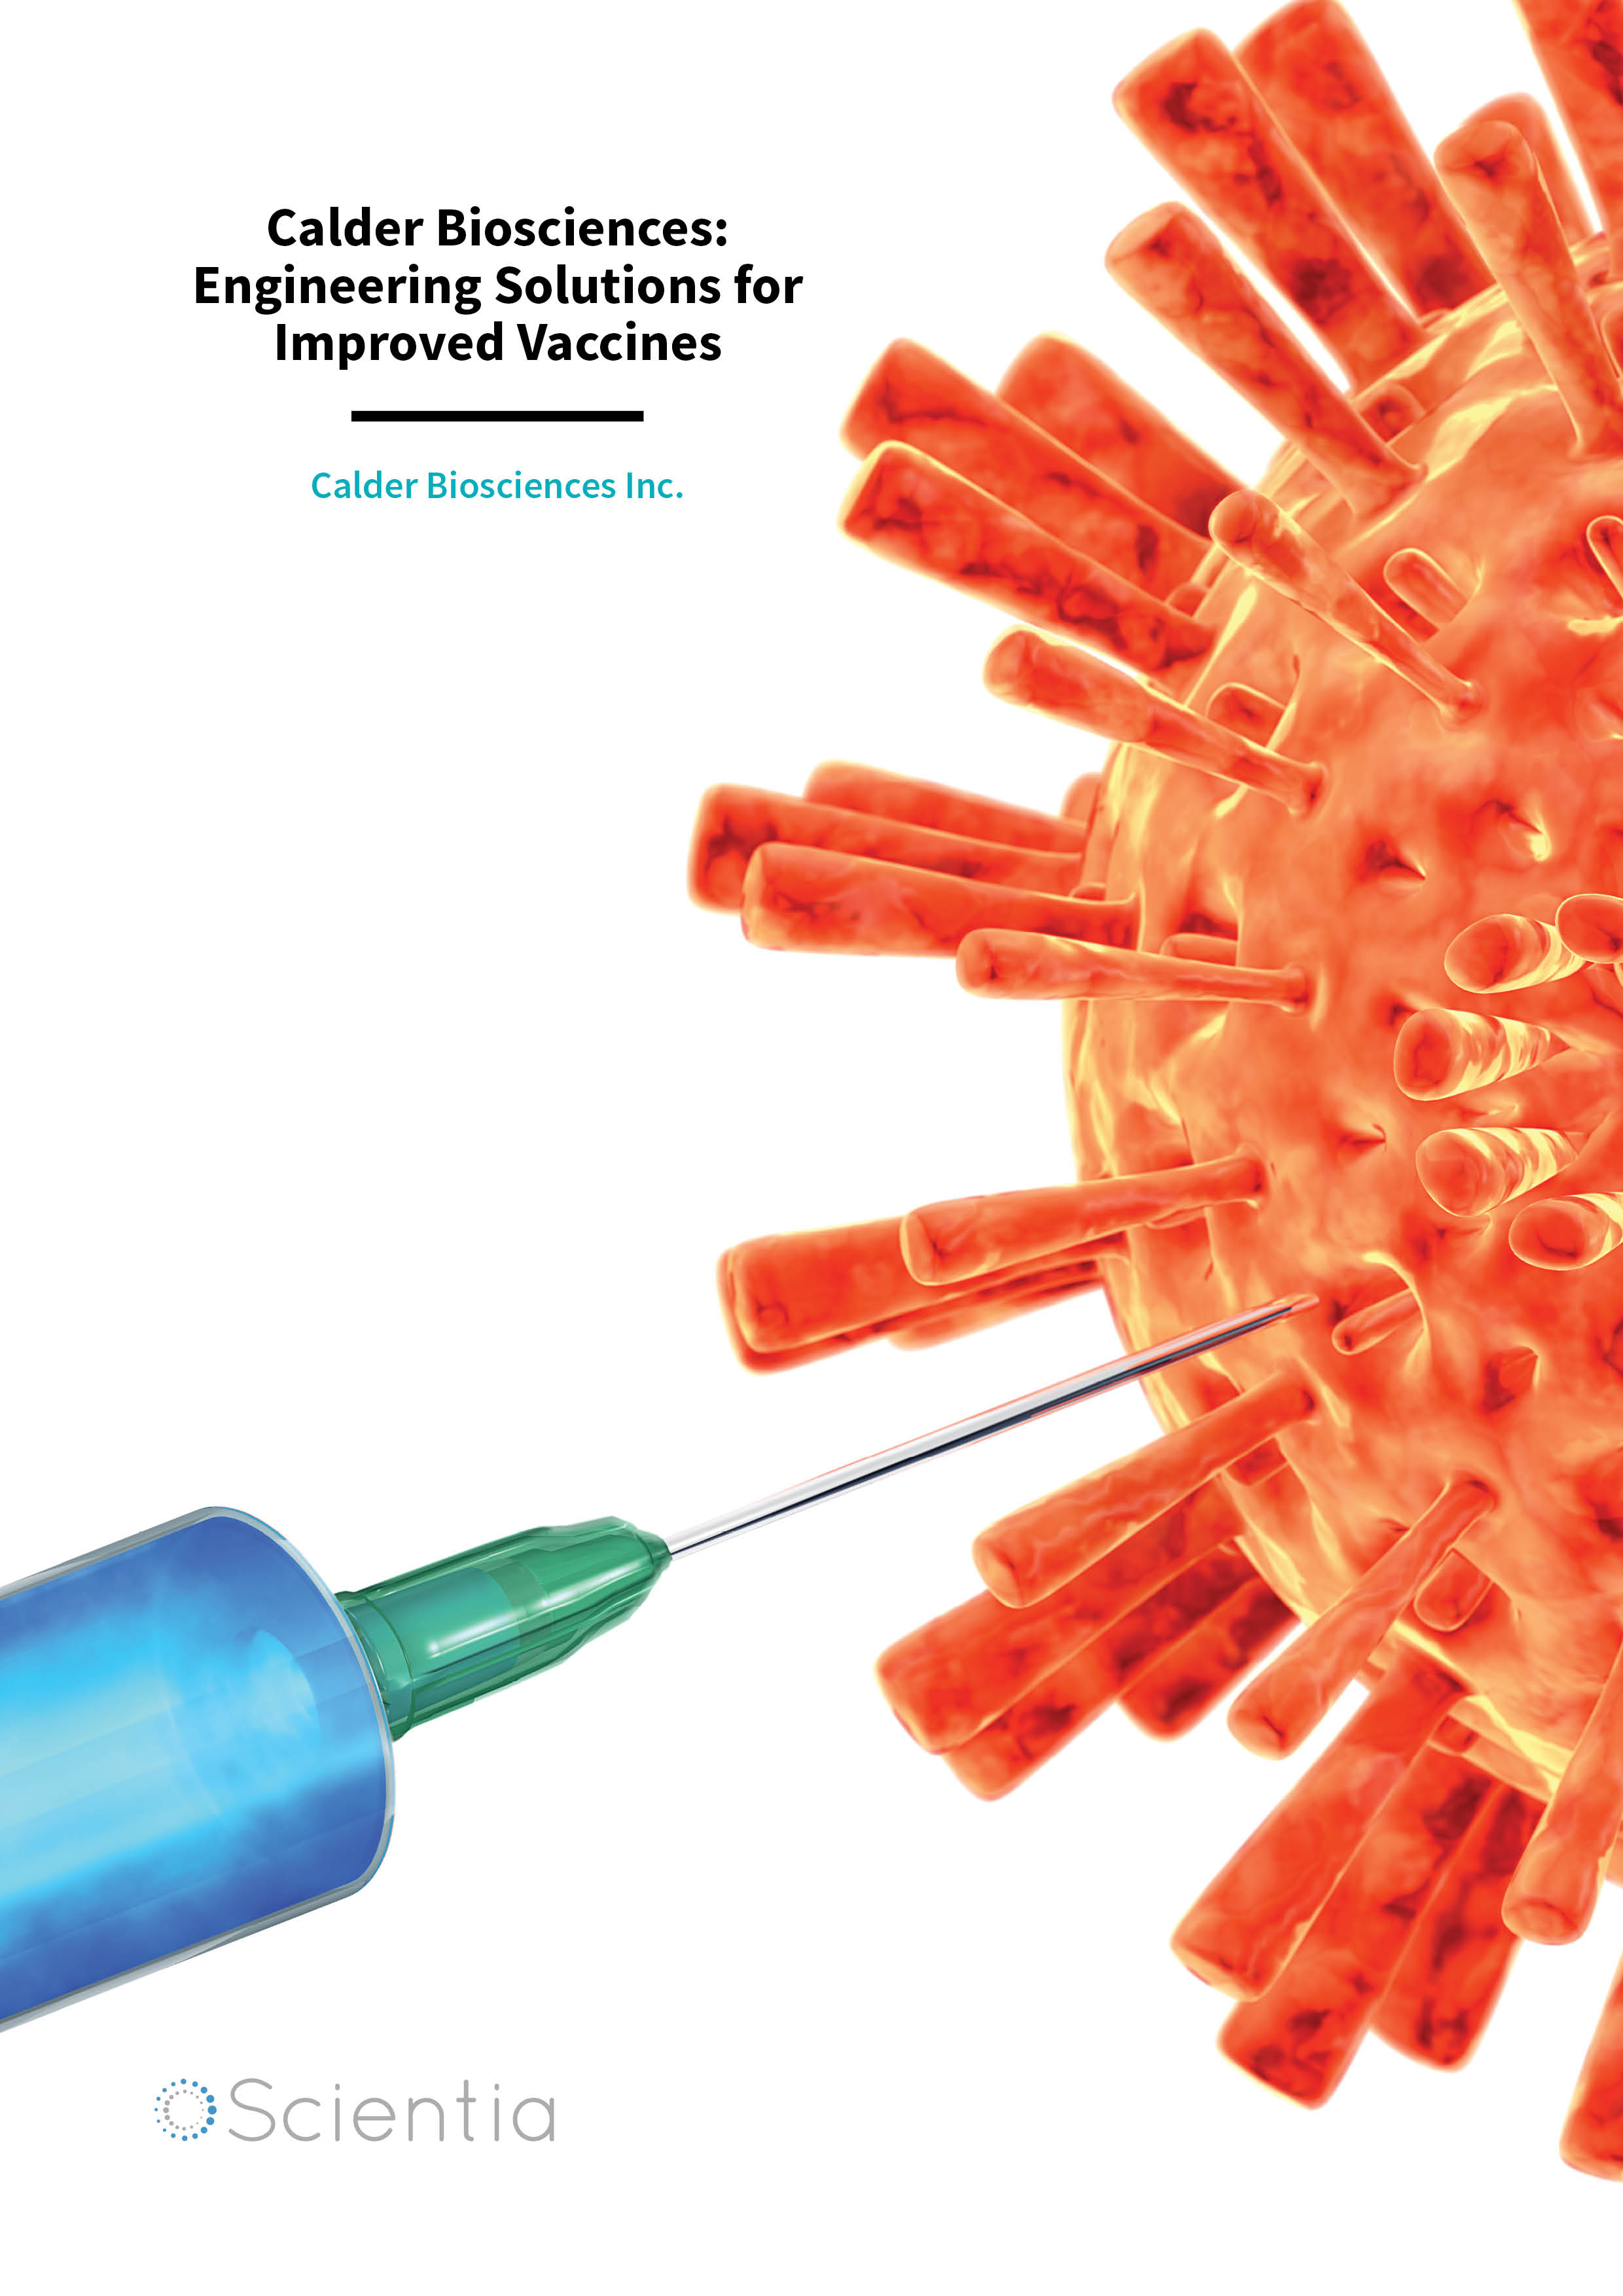 Calder Biosciences: Engineering Solutions for Improved Vaccines